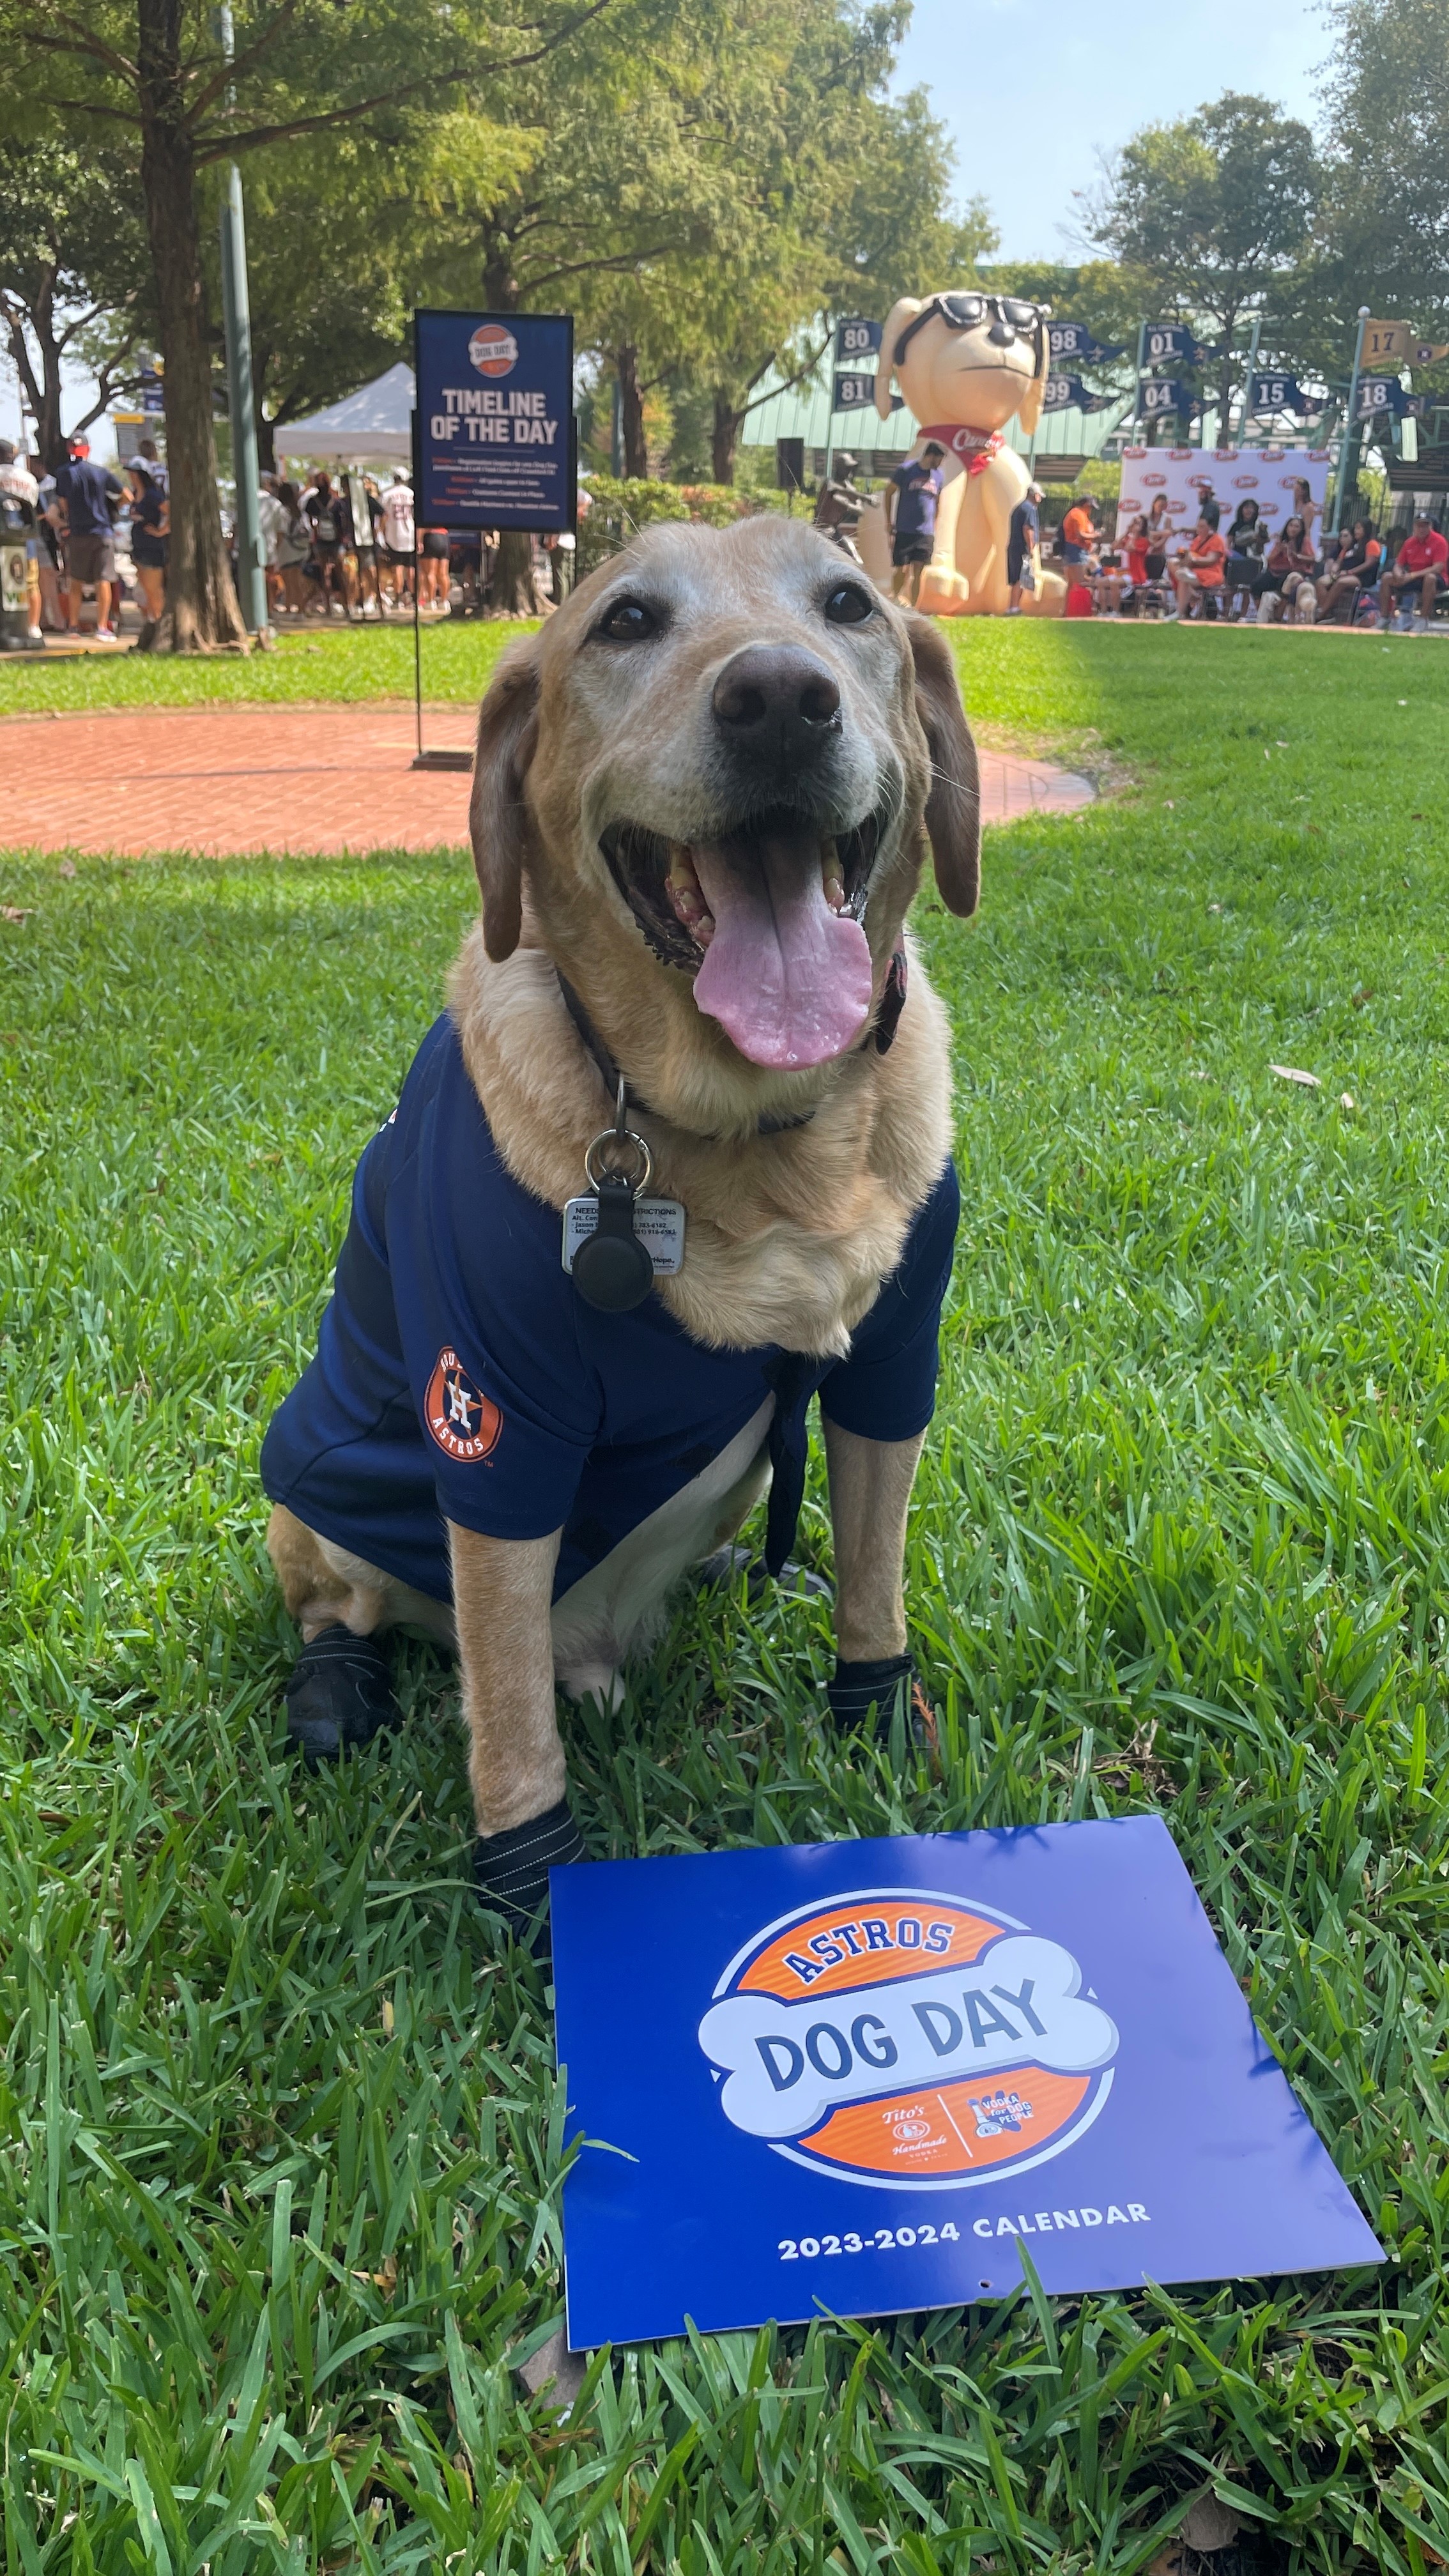 Pets love the Stros! Send photos of your fur baby supporting the